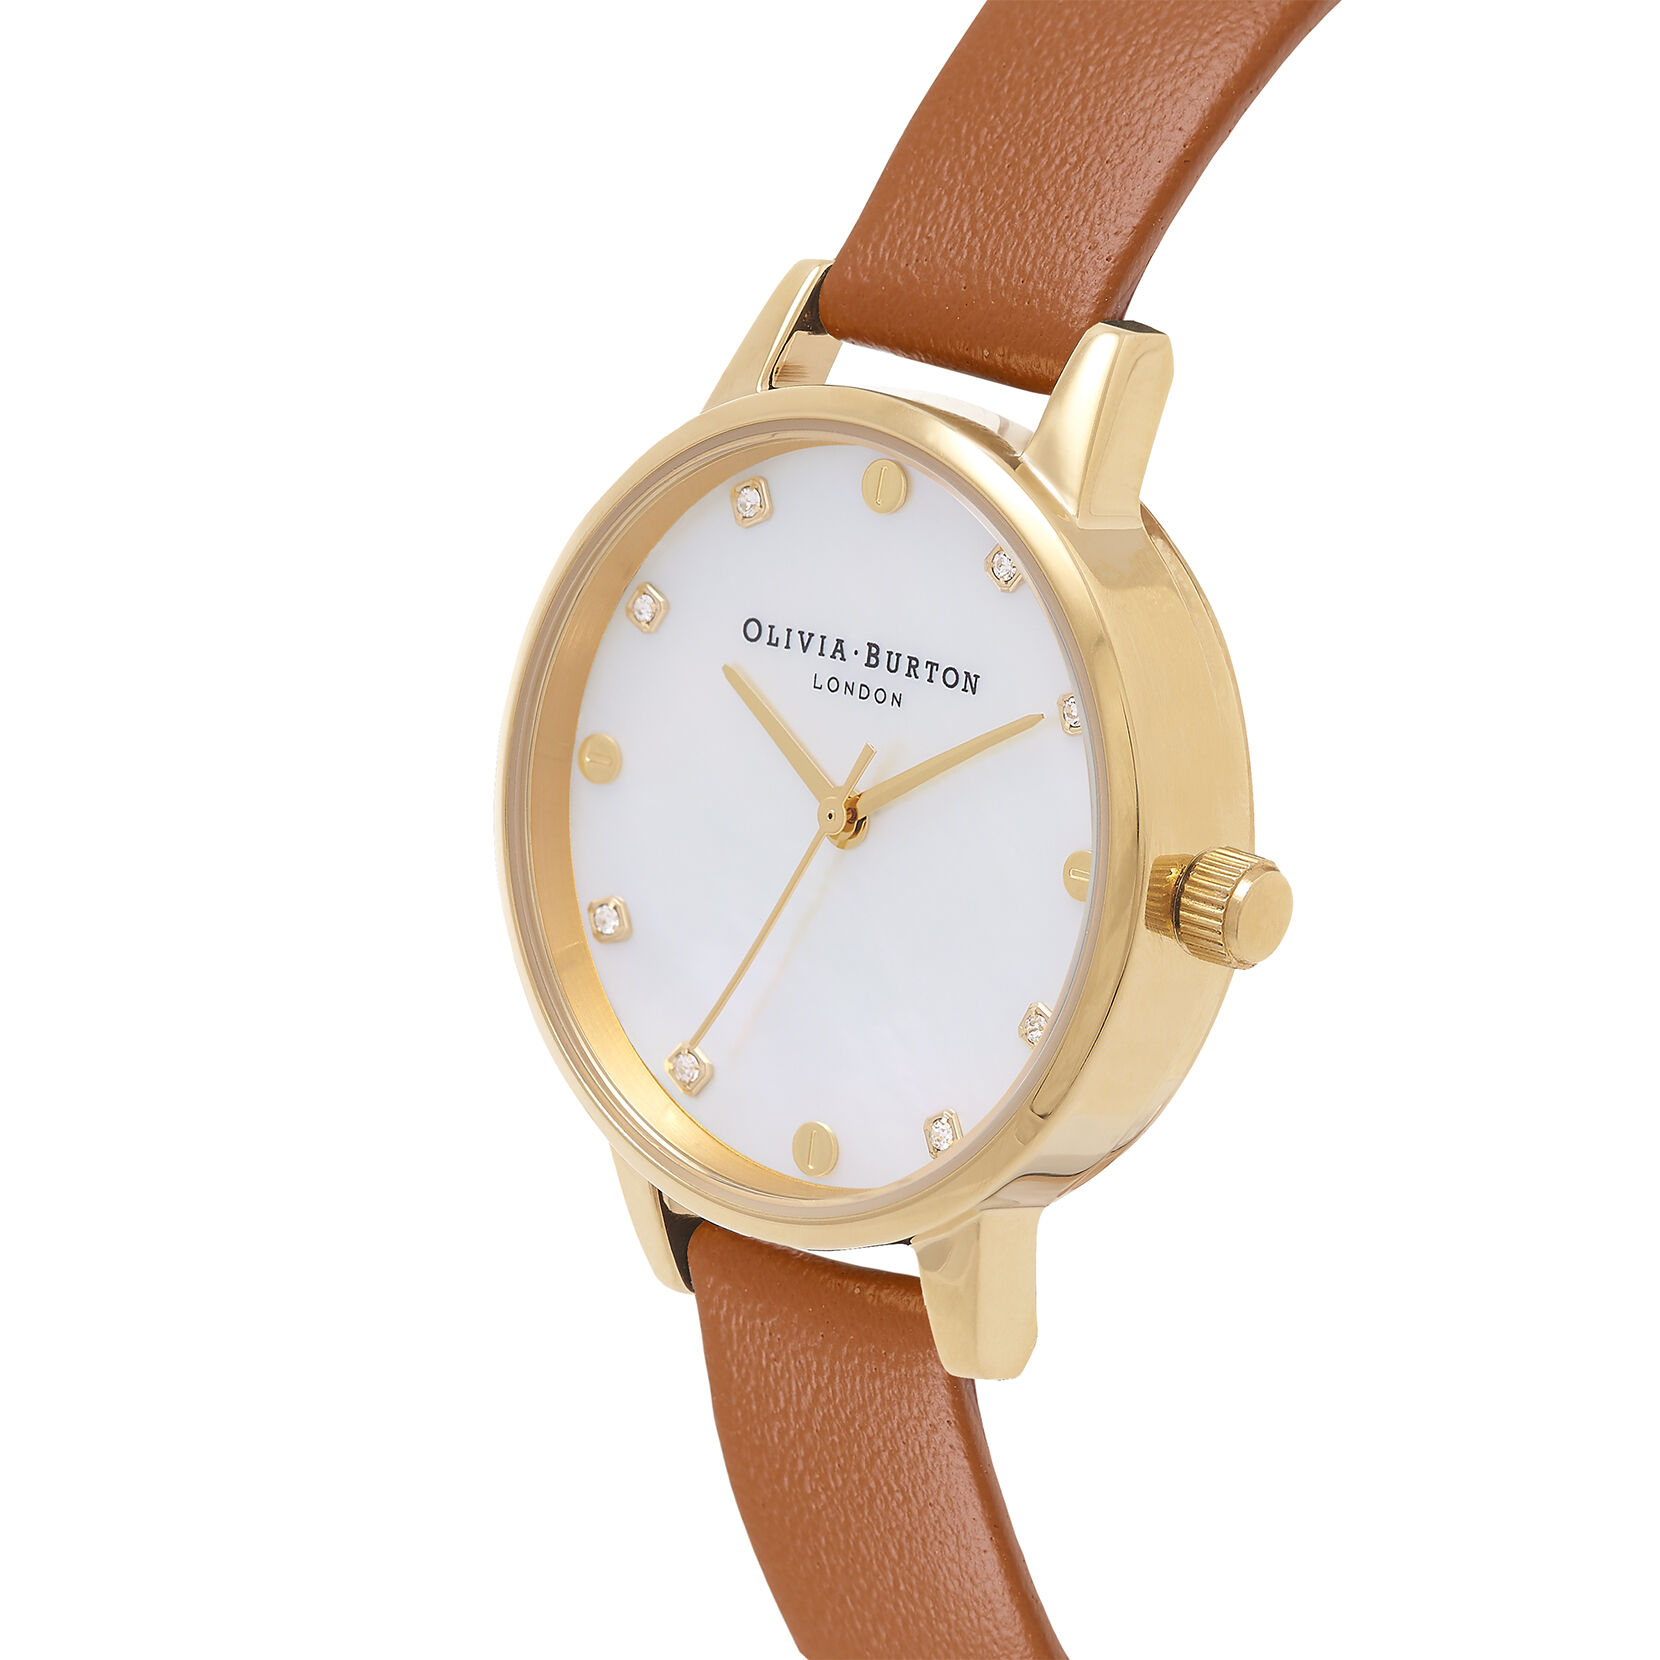 30mm Gold & Tan Leather Strap Watch